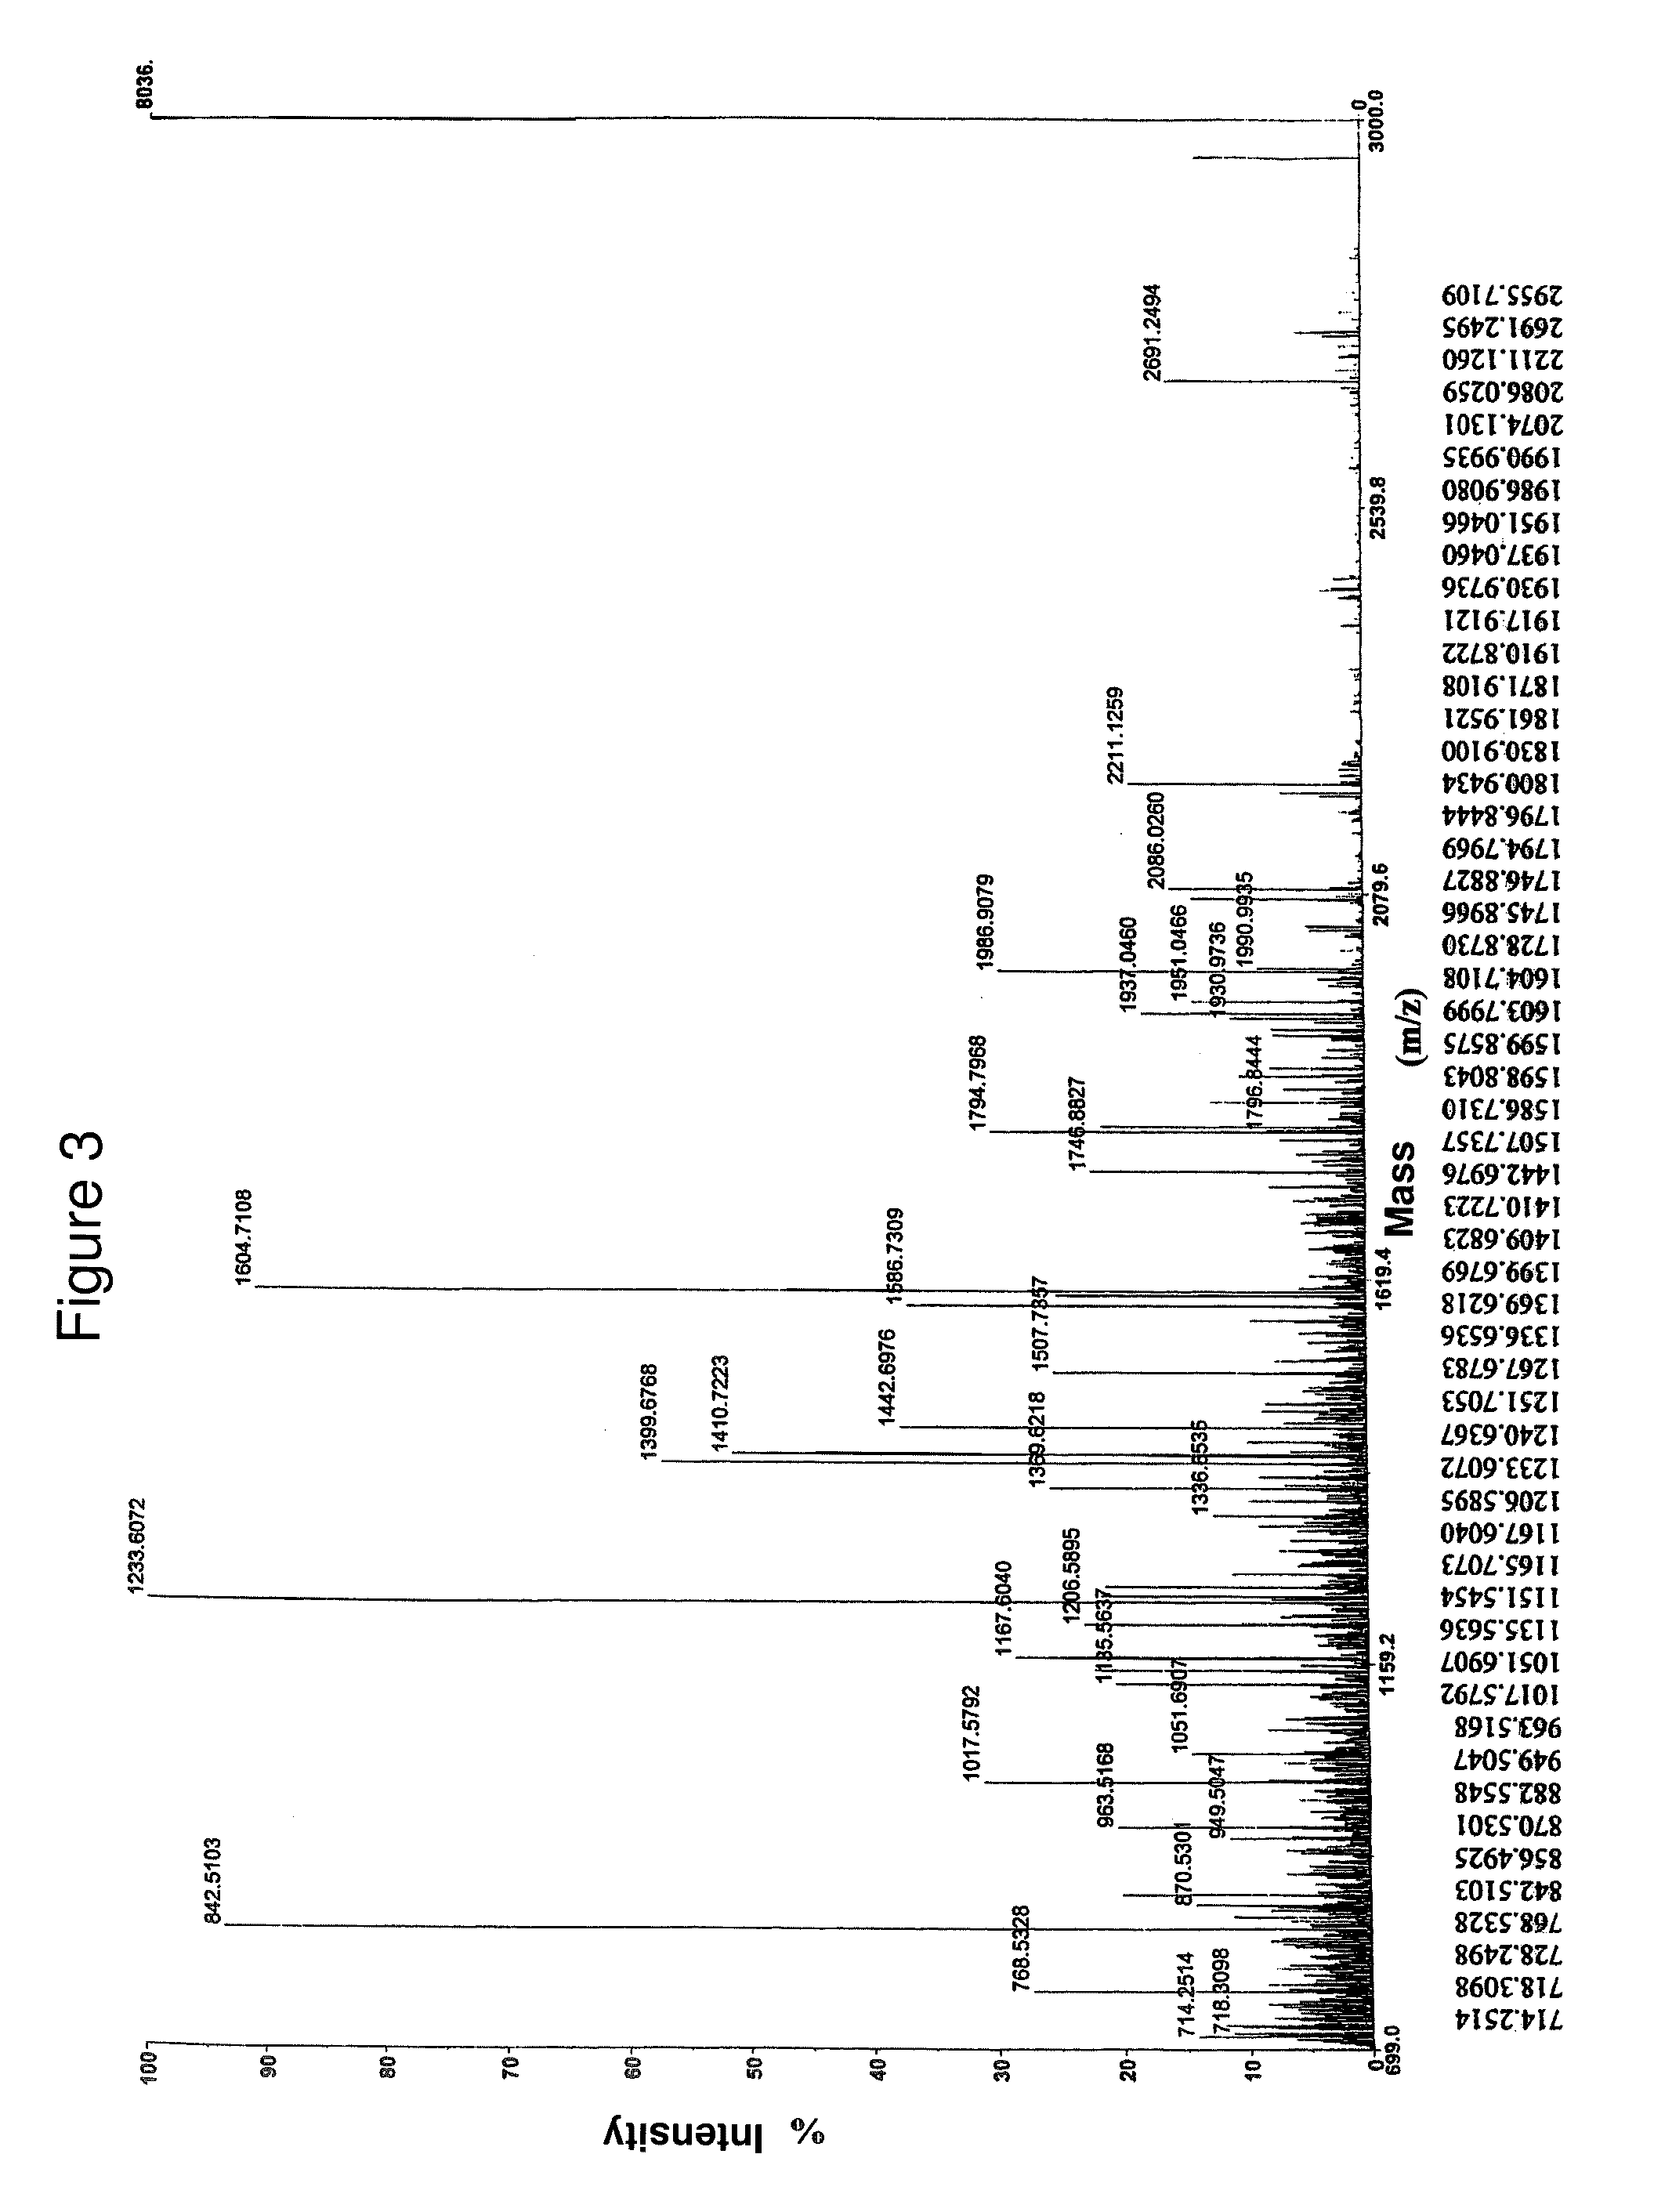 Diagnosis method and treatment for cancer using liv21 proteins and E2F1/E2F4 biomarkers